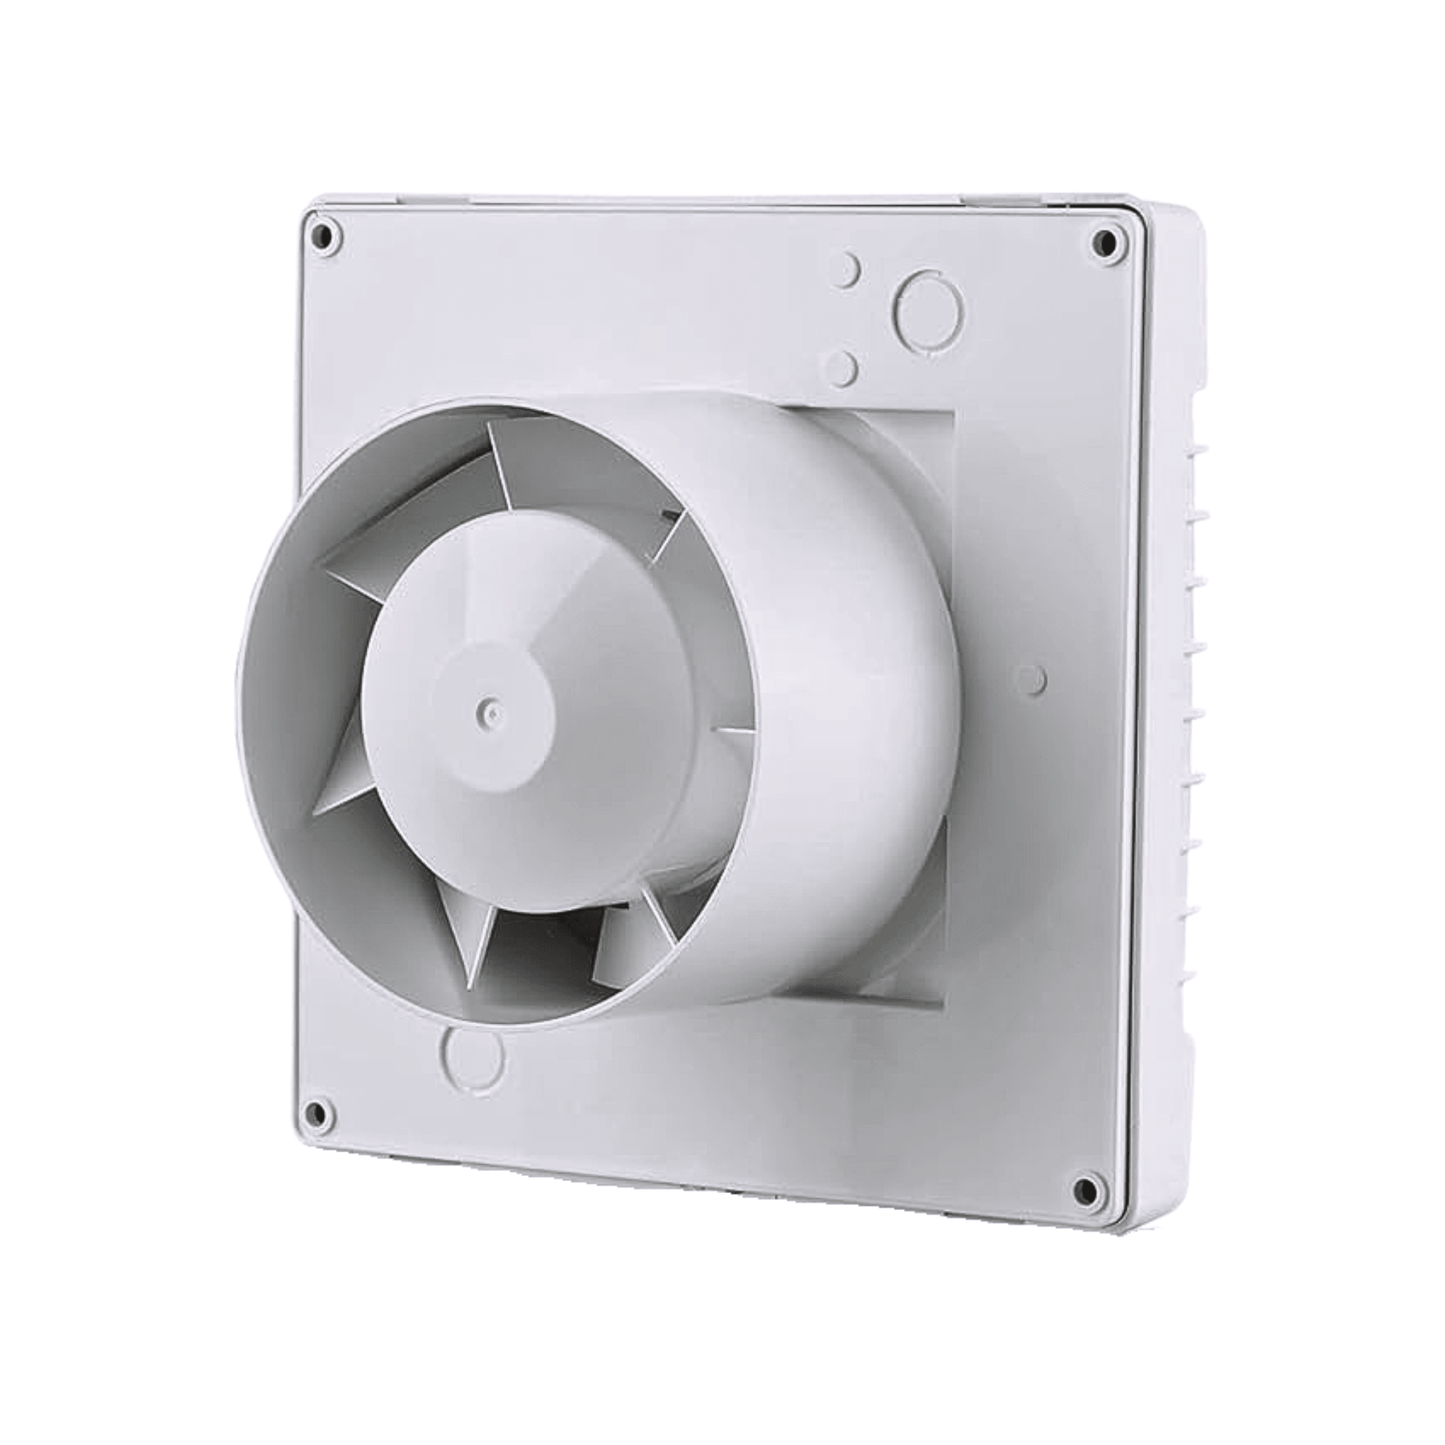 Vents 125 MA Axial Extract Fan